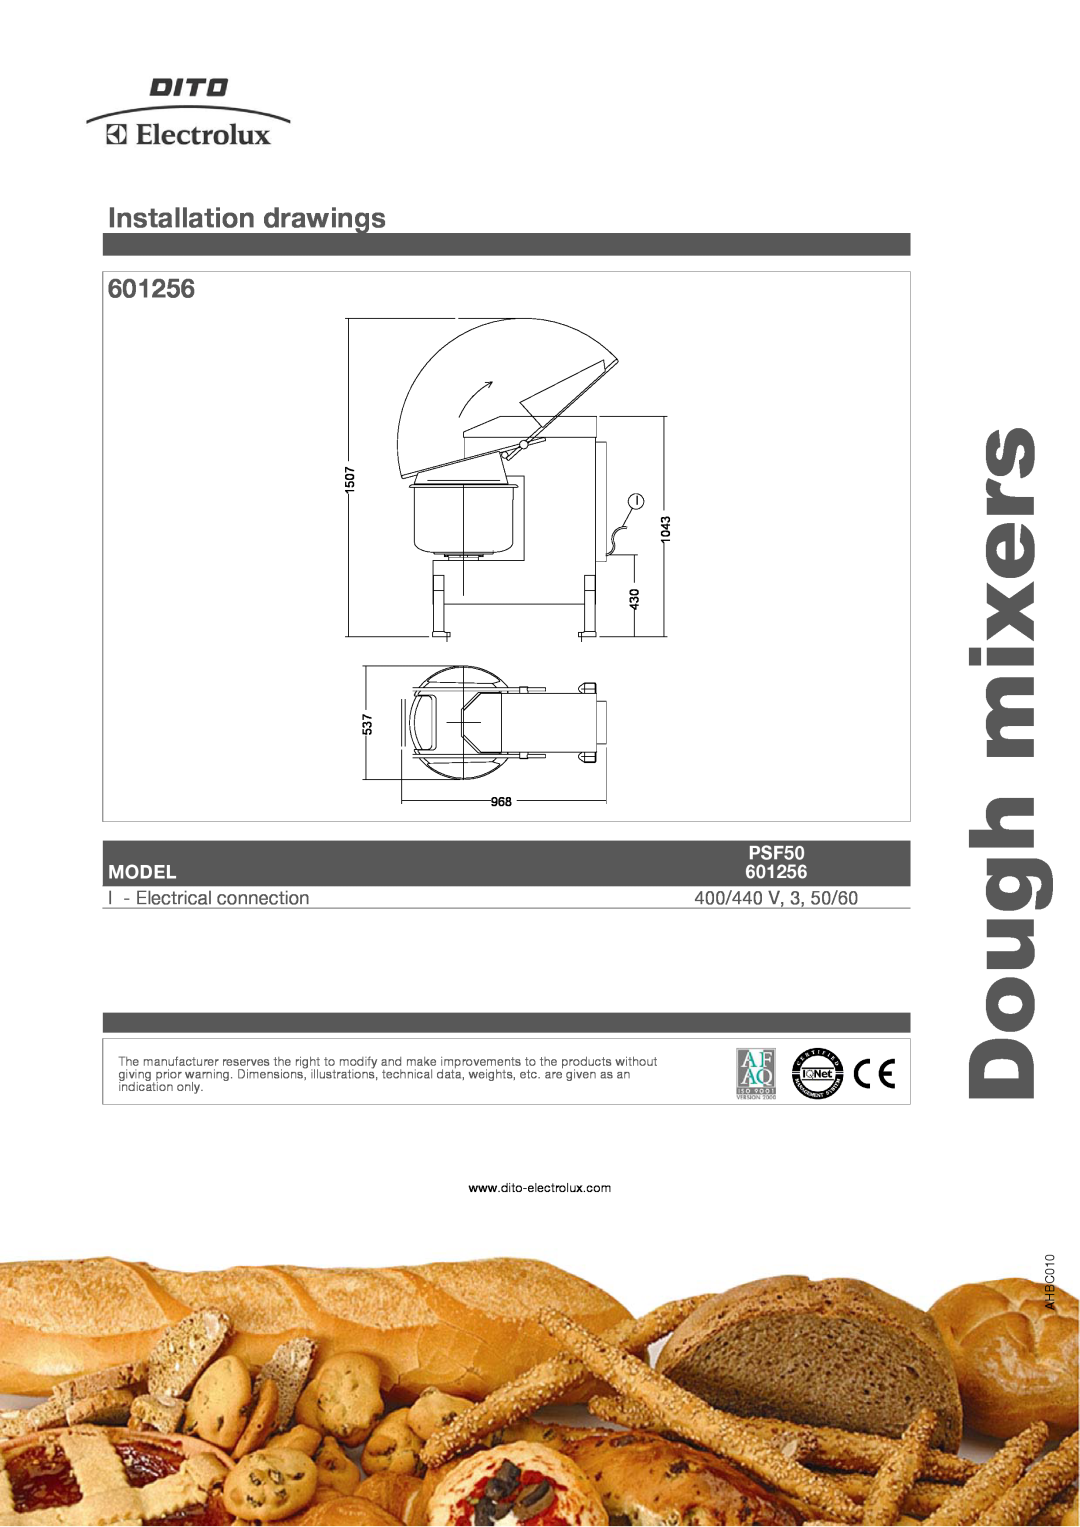 Electrolux PSF50 manual Dough mixers, Installation drawings, 601256, Model, 1507 I 1043 430, AHBC010 